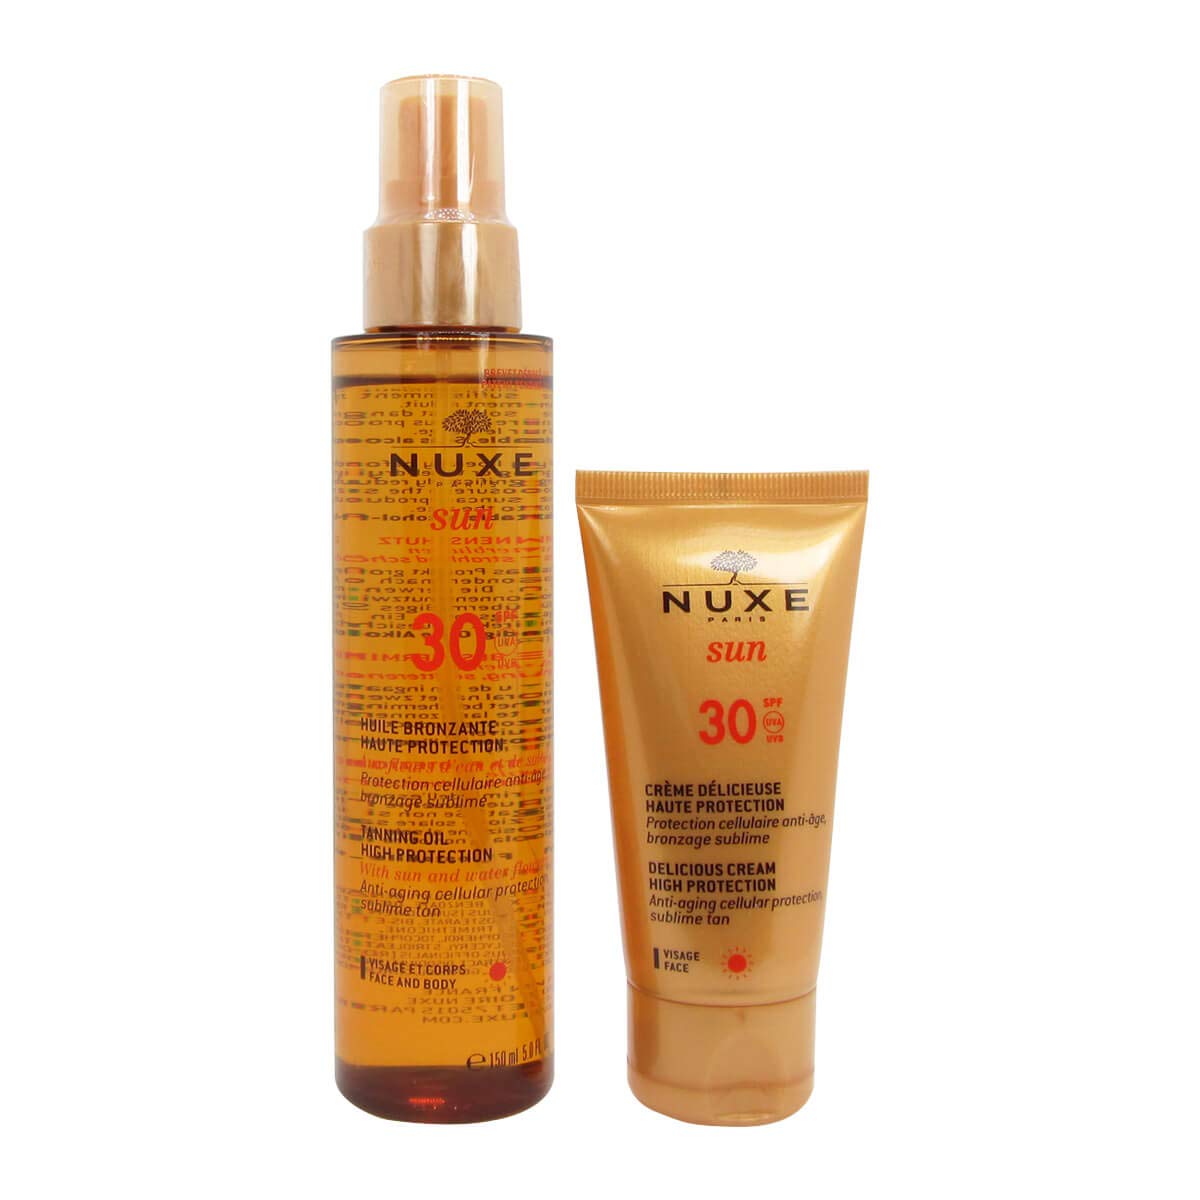 Nuxe Huile Bronzante Haute Protection SPF 30 Gift Set 150 ml + Cream Délicieuse Haute Protection SPF 30 50 ml 1 Pack